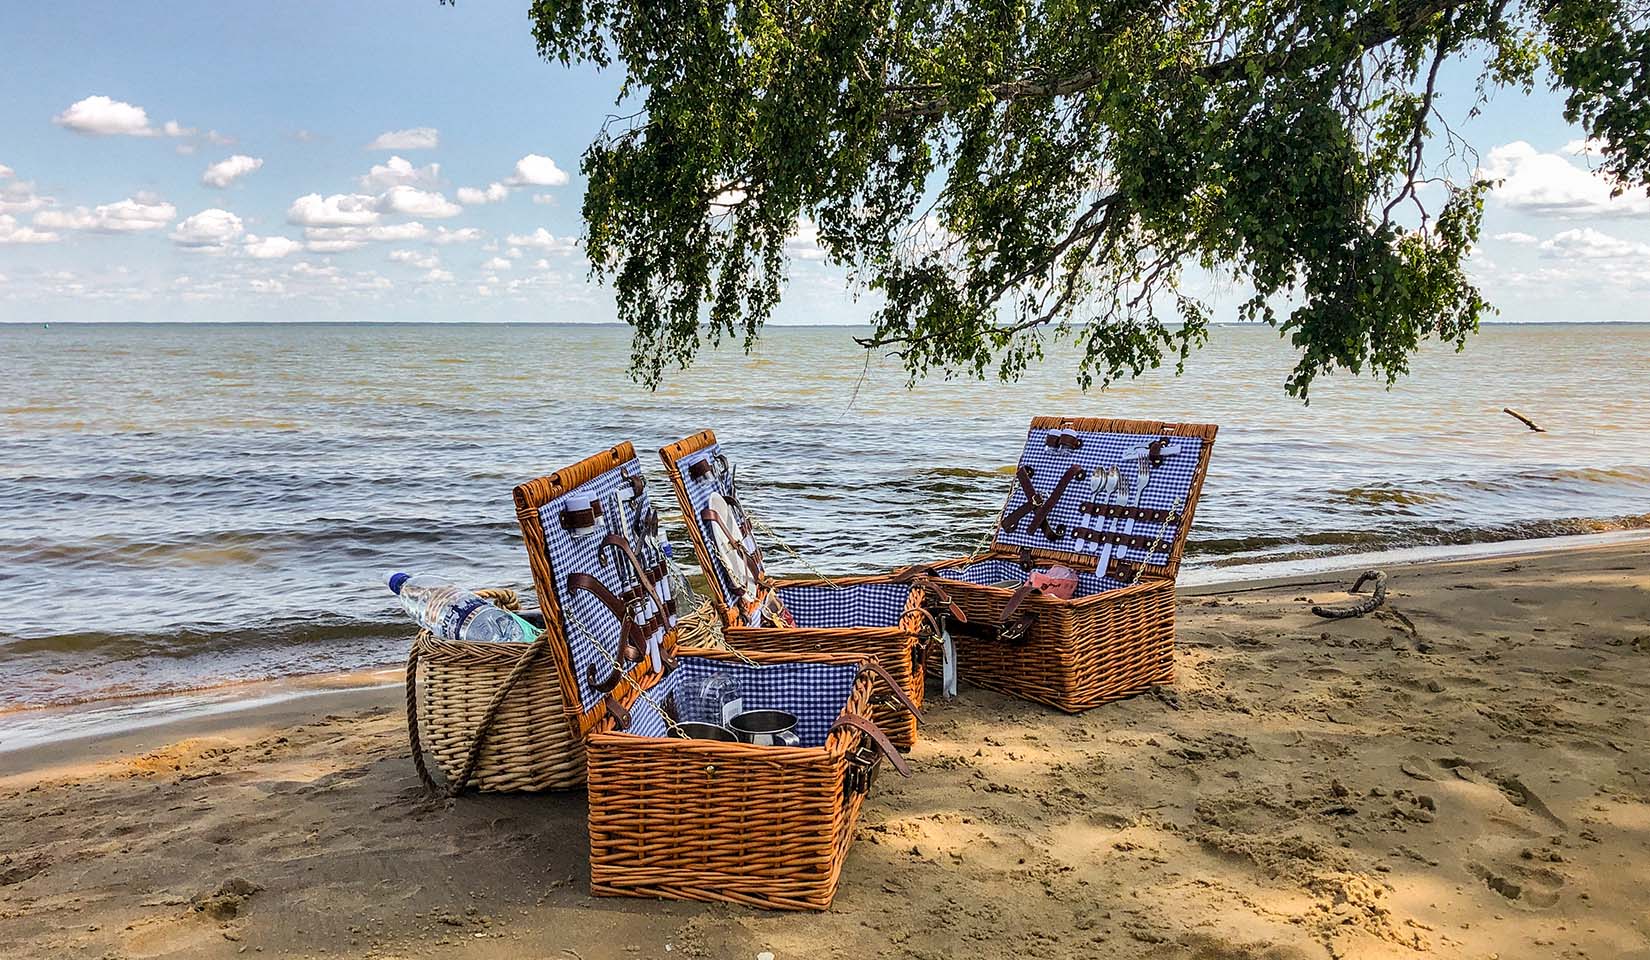 Picnic baskets on the beach